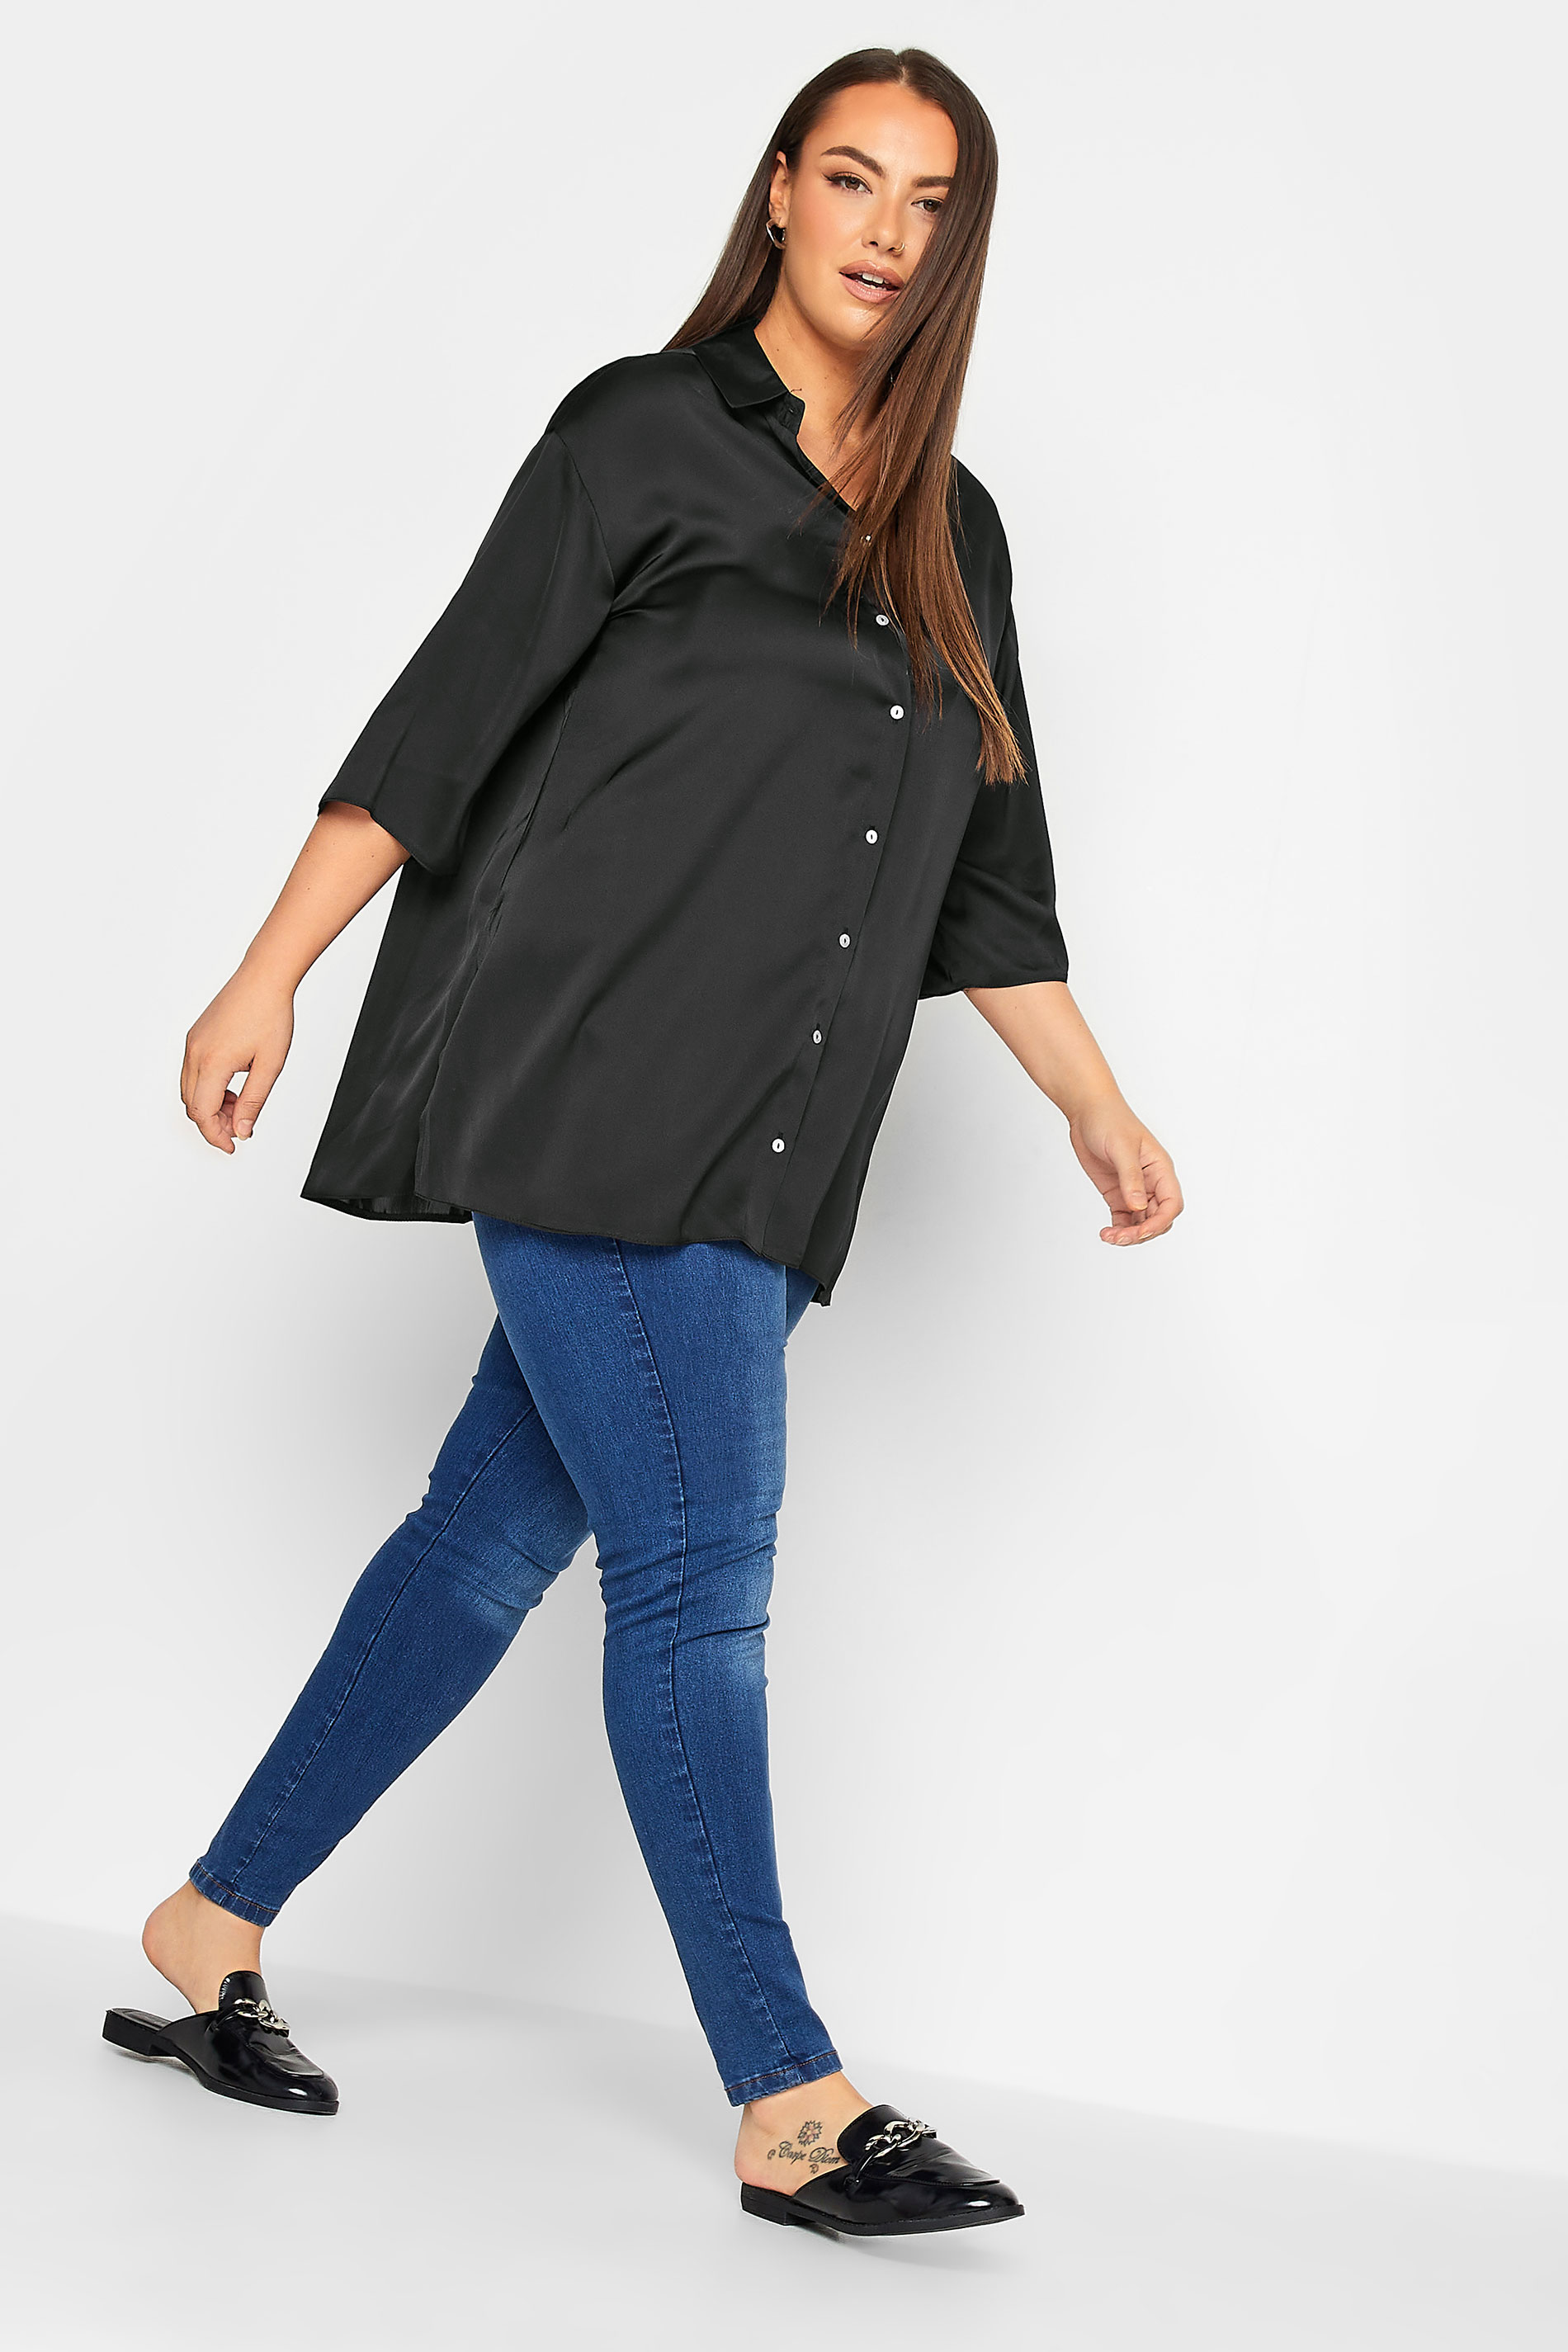 YOURS Curve Plus Size Black Satin Shirt | Yours Clothing  2